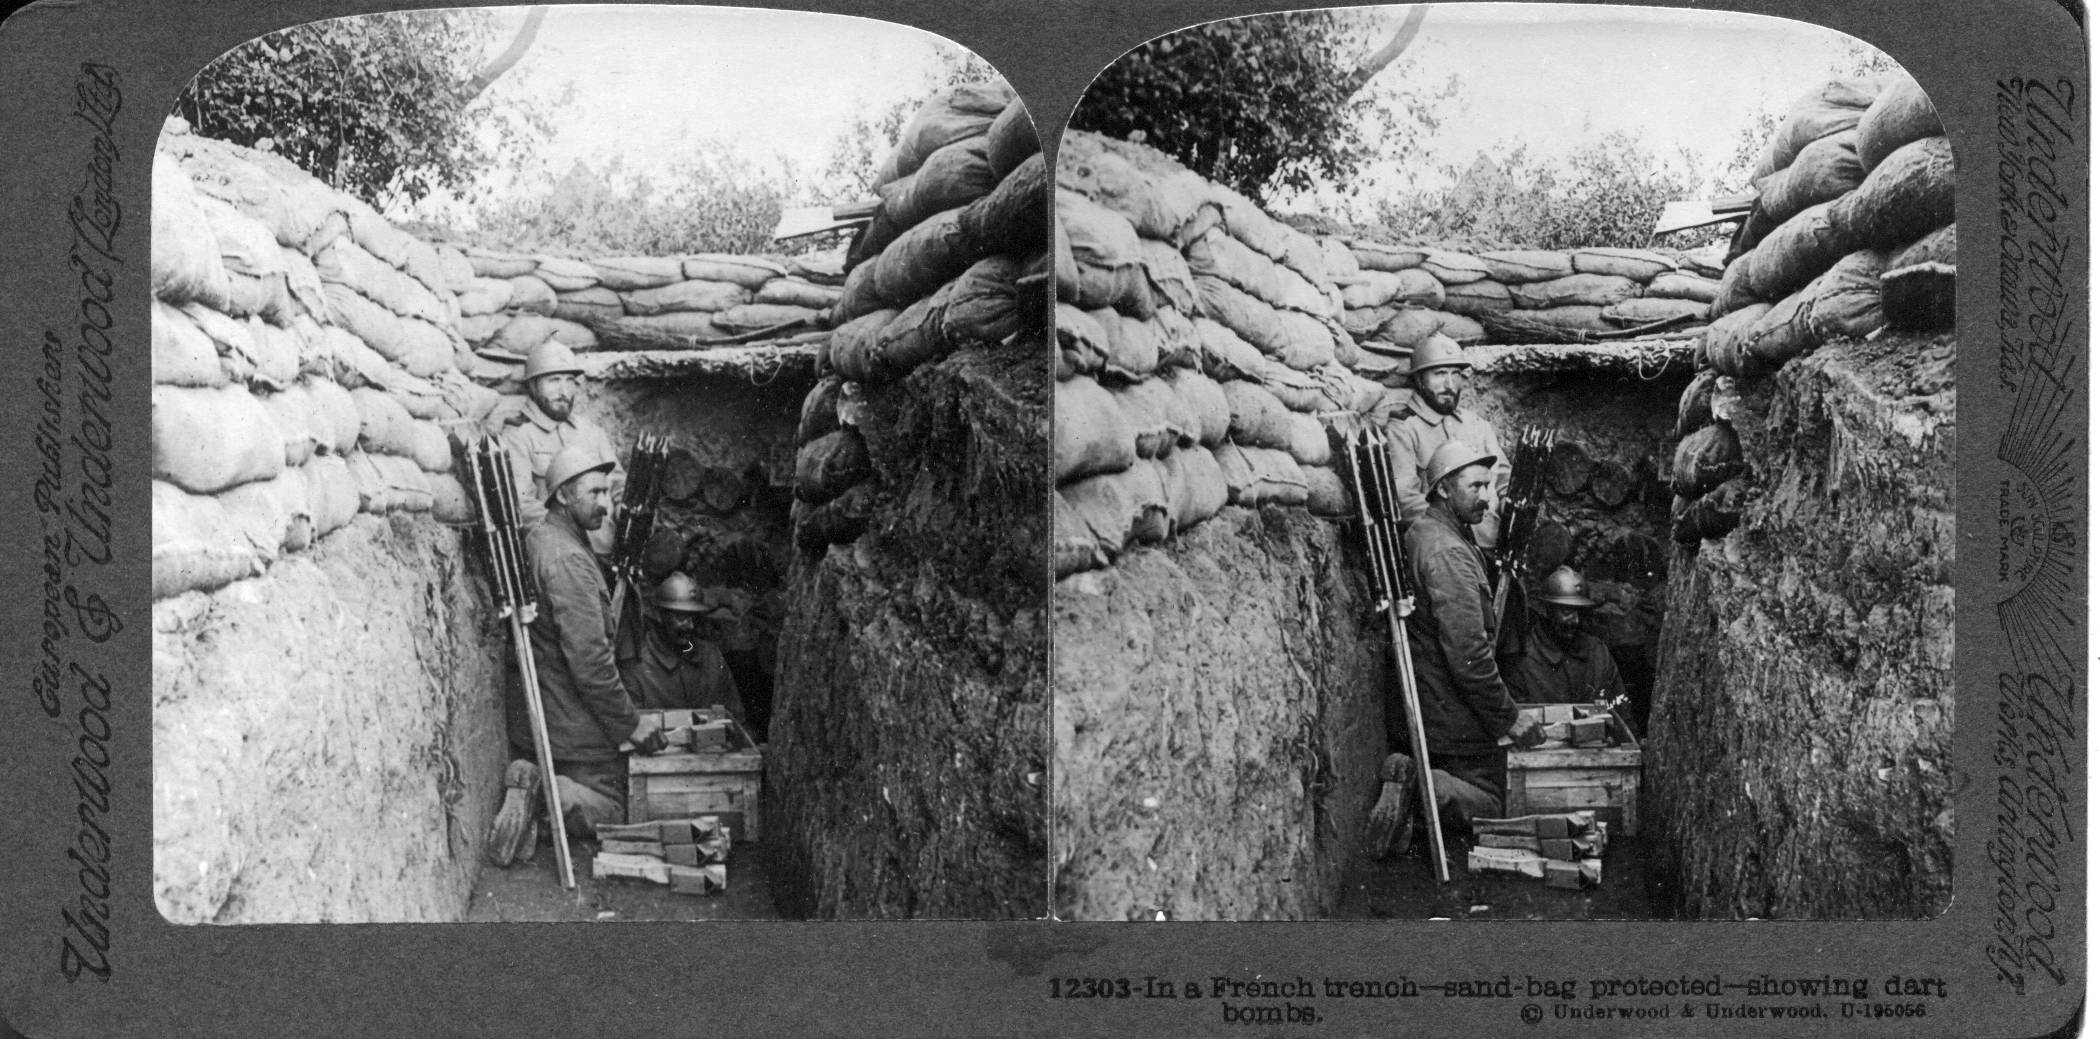 In a French trench--sand-bag protected--showing dart bombs